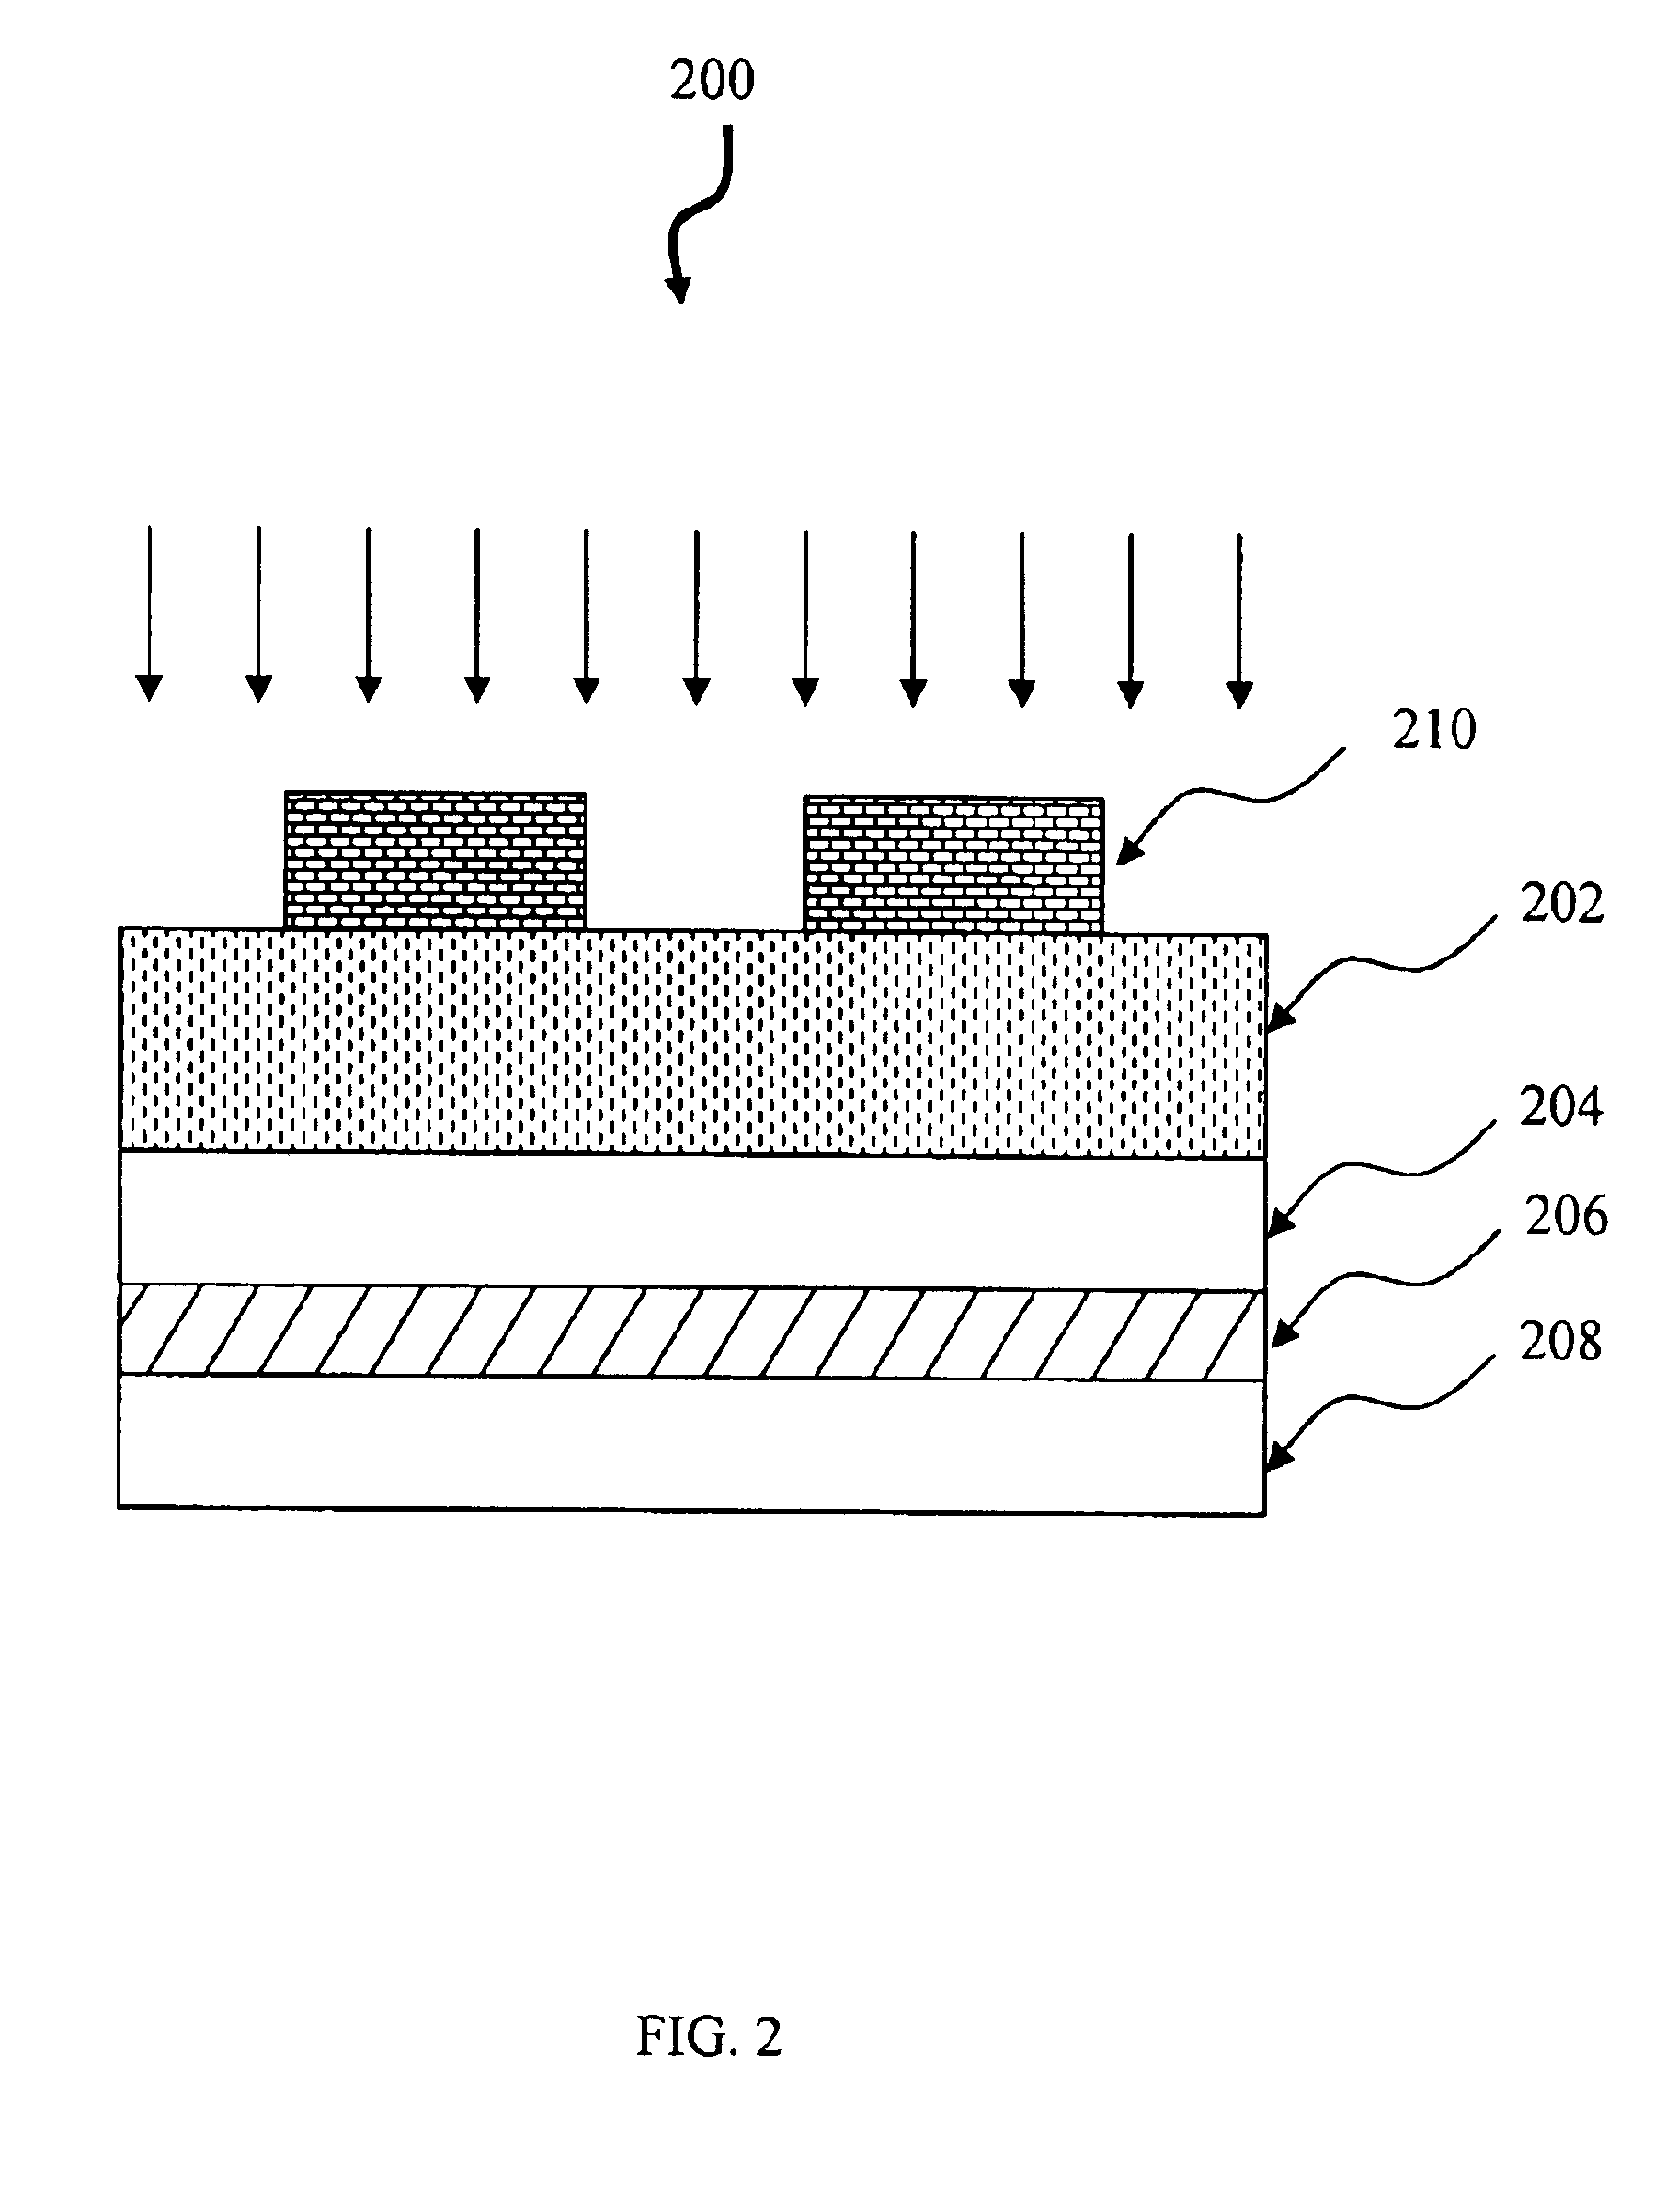 Method for quantum well intermixing using pre-annealing enhanced defects diffusion